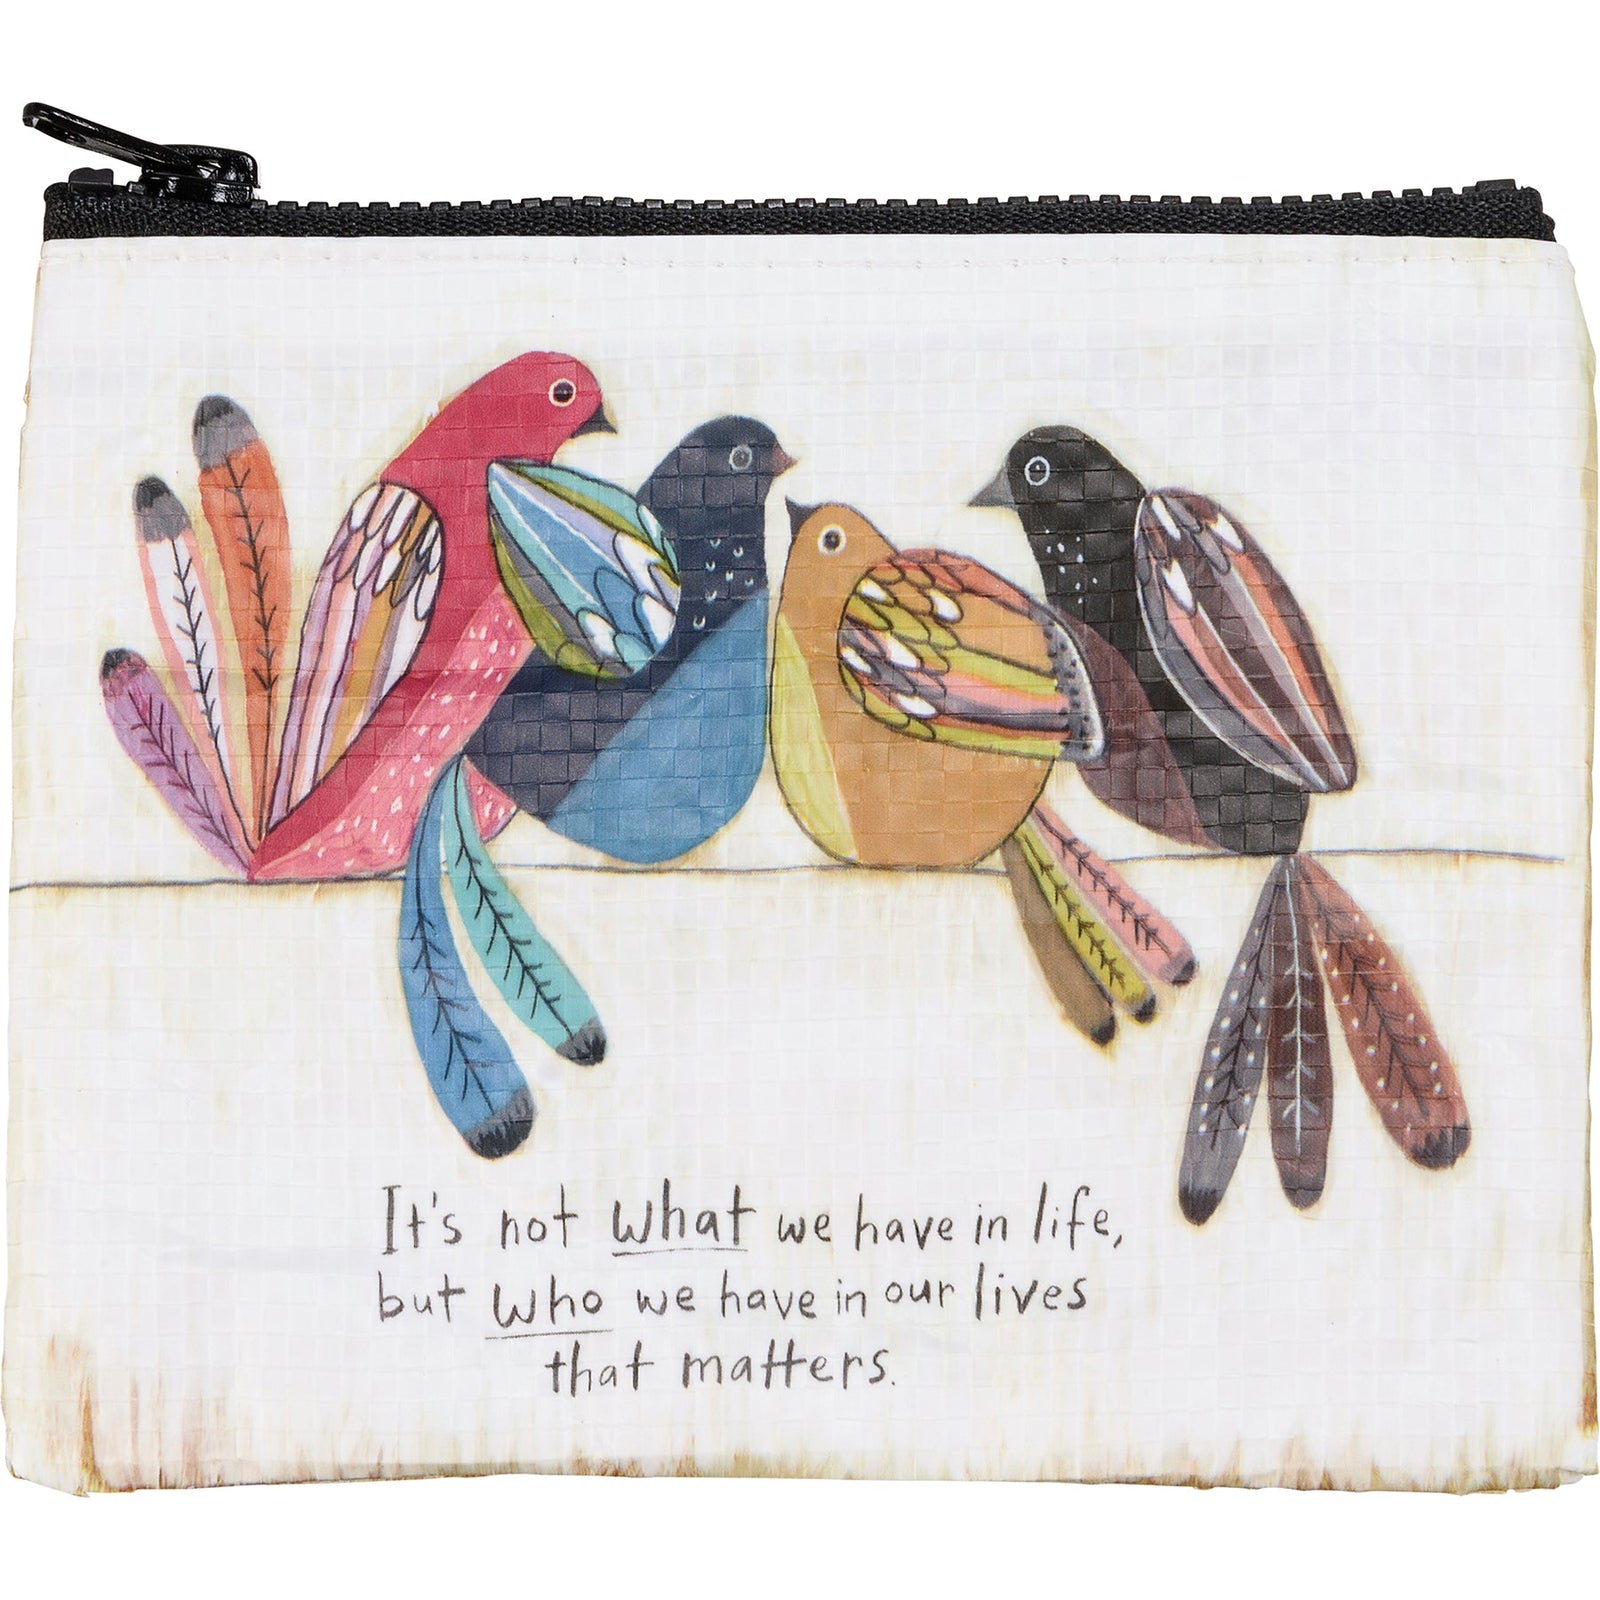 It's Not What We Have In Life, But Who We Have In Our Lives That Matters Zipper Wallet | Recycled Material Organizer Pouch | 5.25" x 4.25"